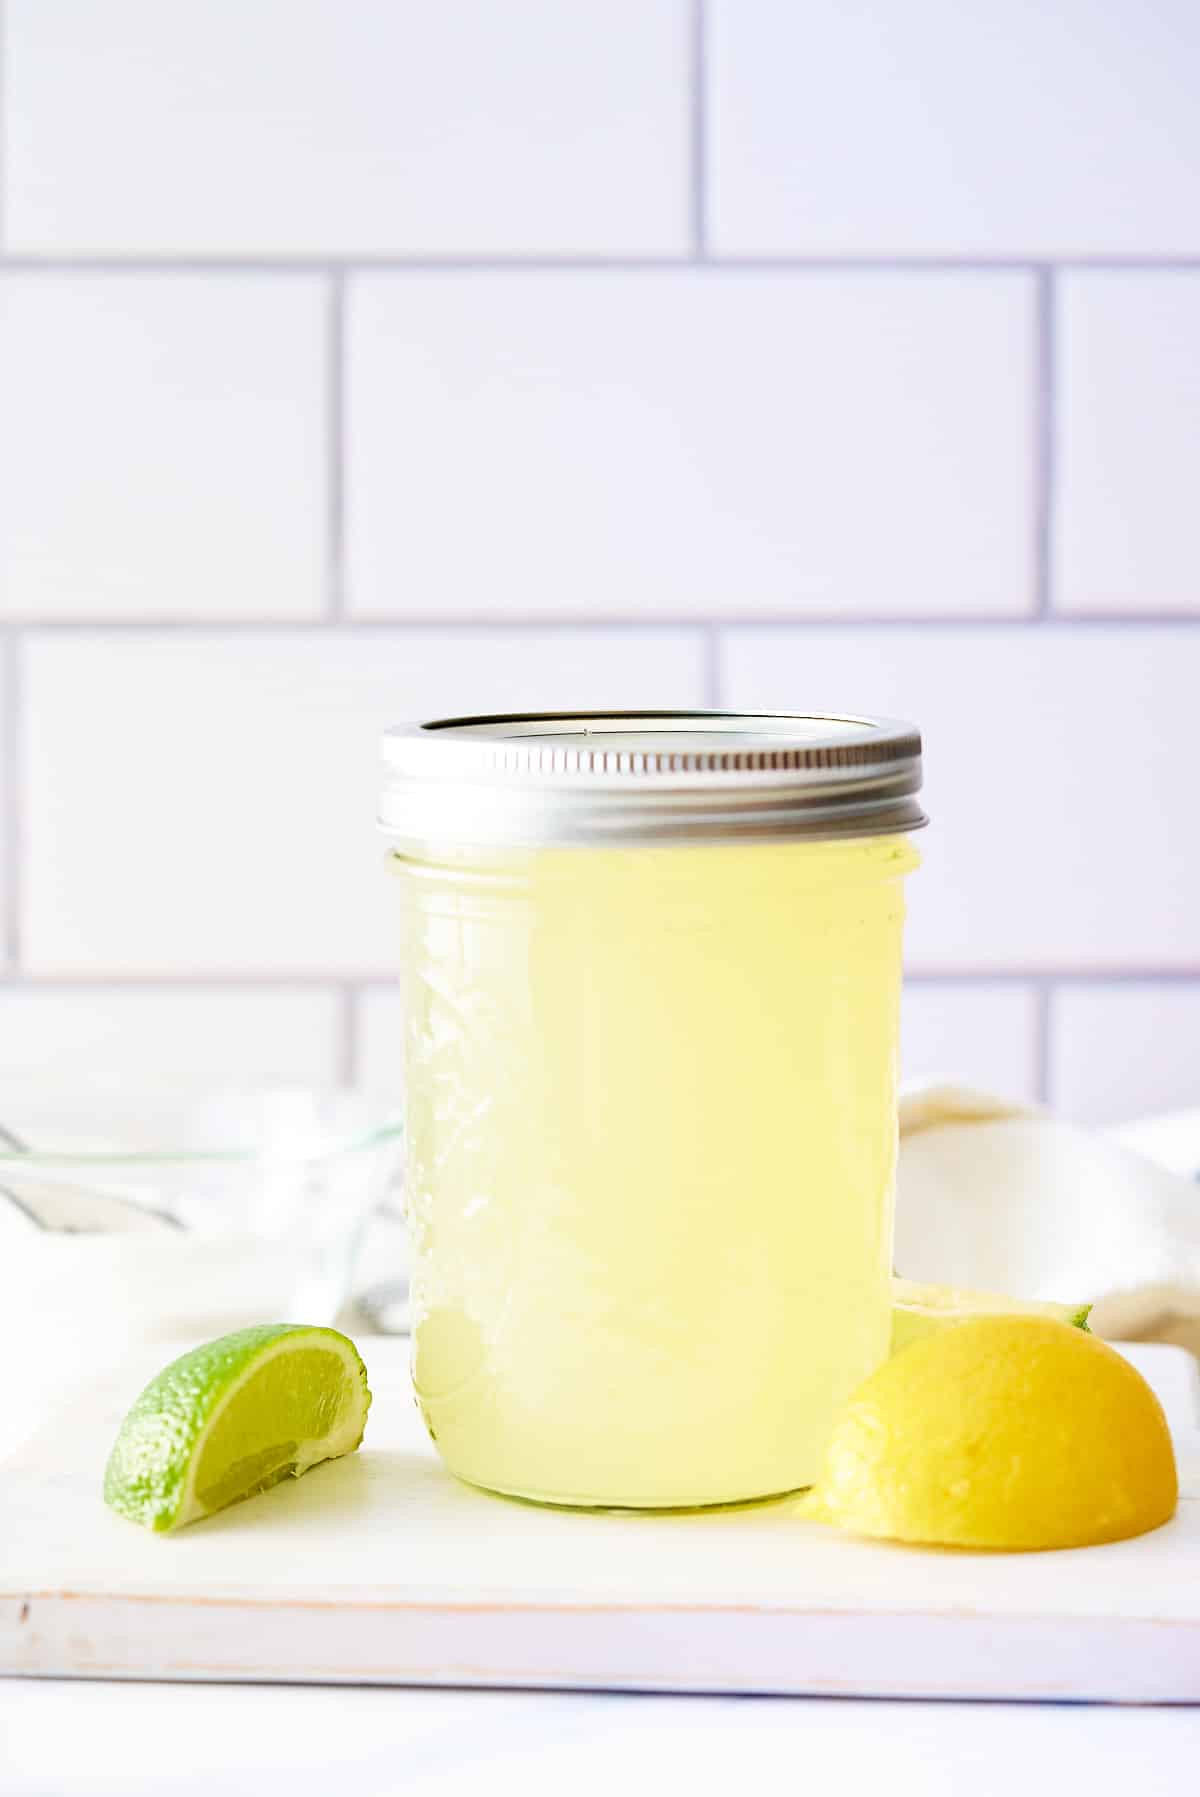 A glass jar filled with sweet and sour mix set on a board with wedges of lemon and lime set alongside.